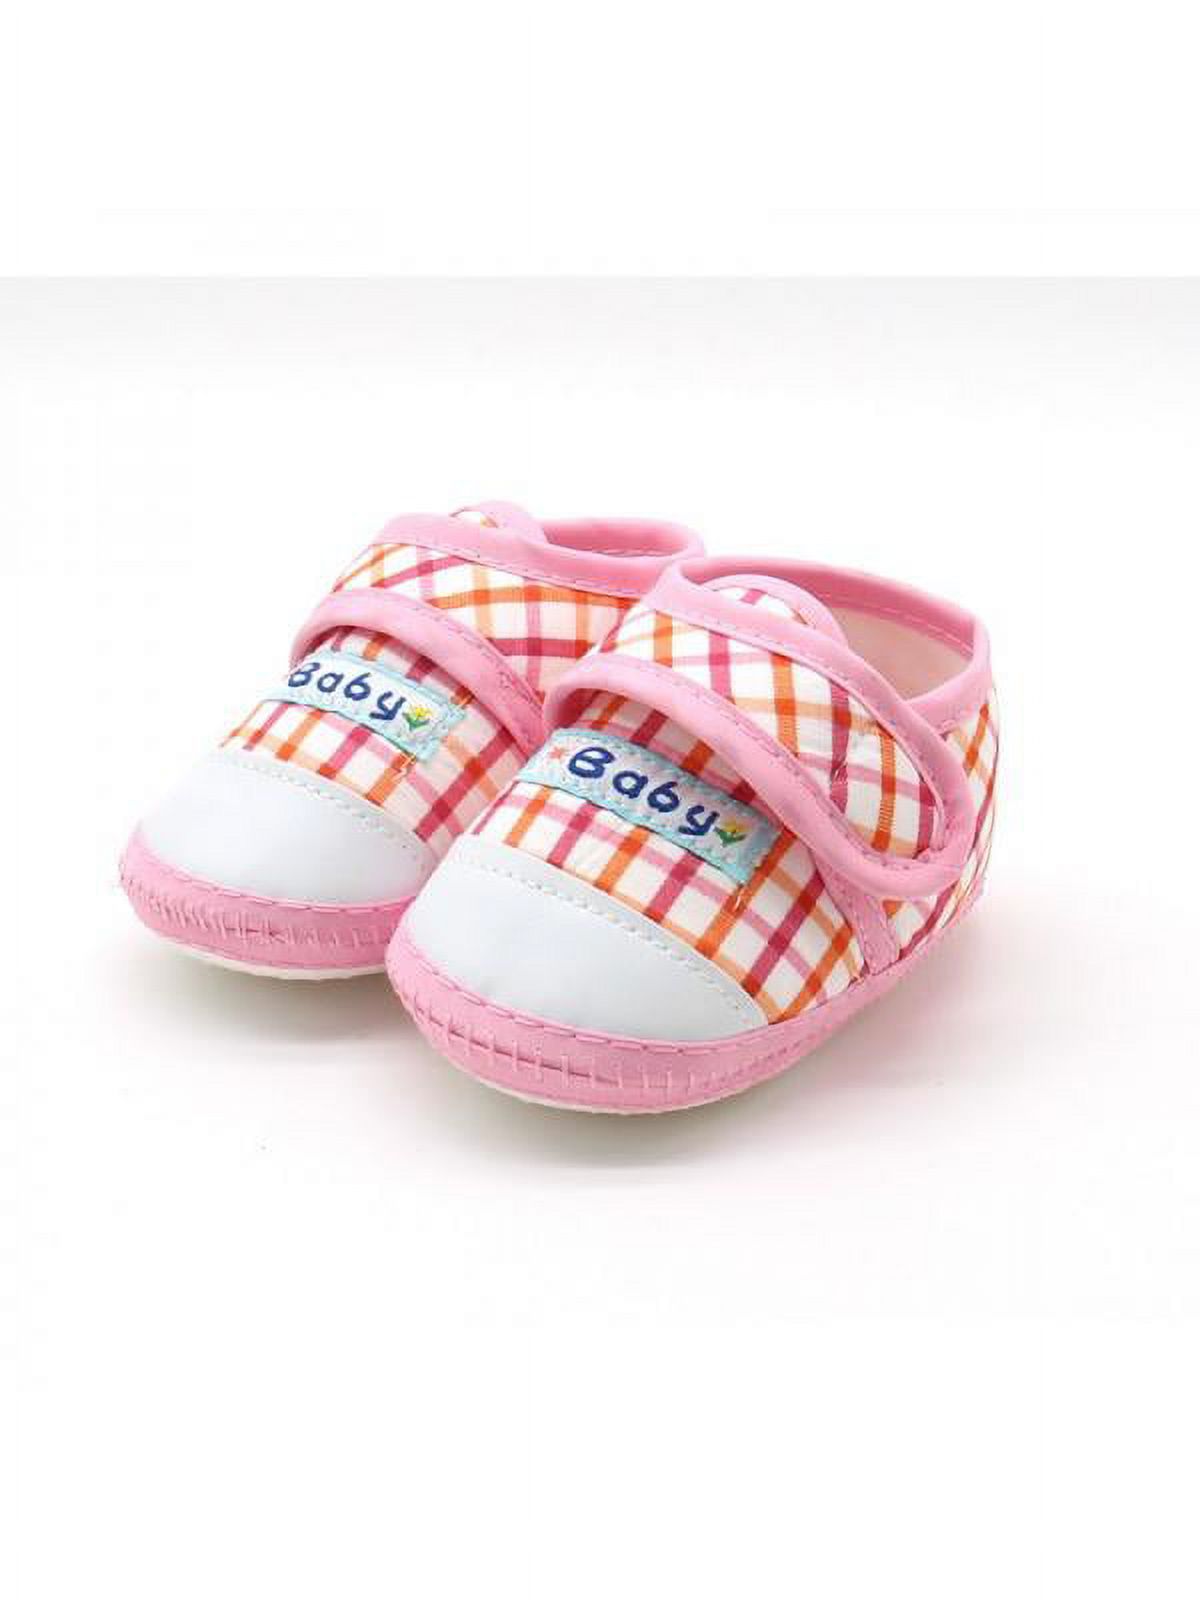 Baby Toddler Girl Boy Shoes Sneakers Soft Sole First Walker - image 1 of 8